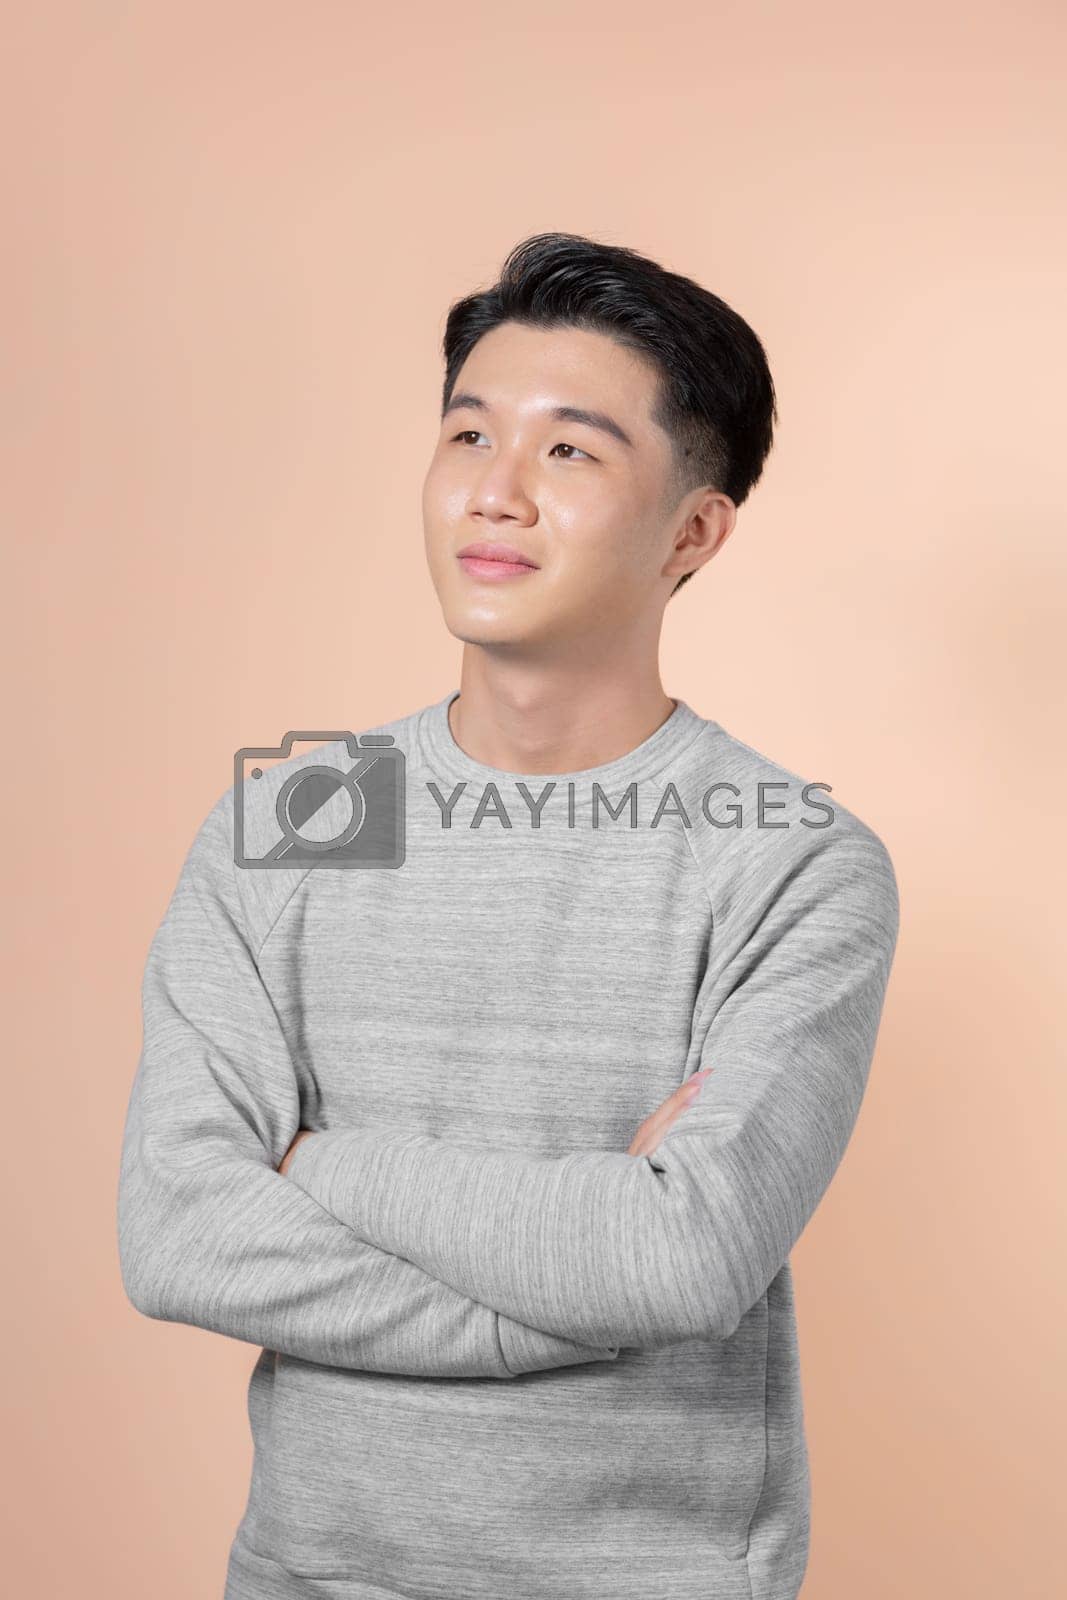 Royalty free image of Portrait of attractive cheerful experienced intelligent man folded arms isolated over beige background by makidotvn